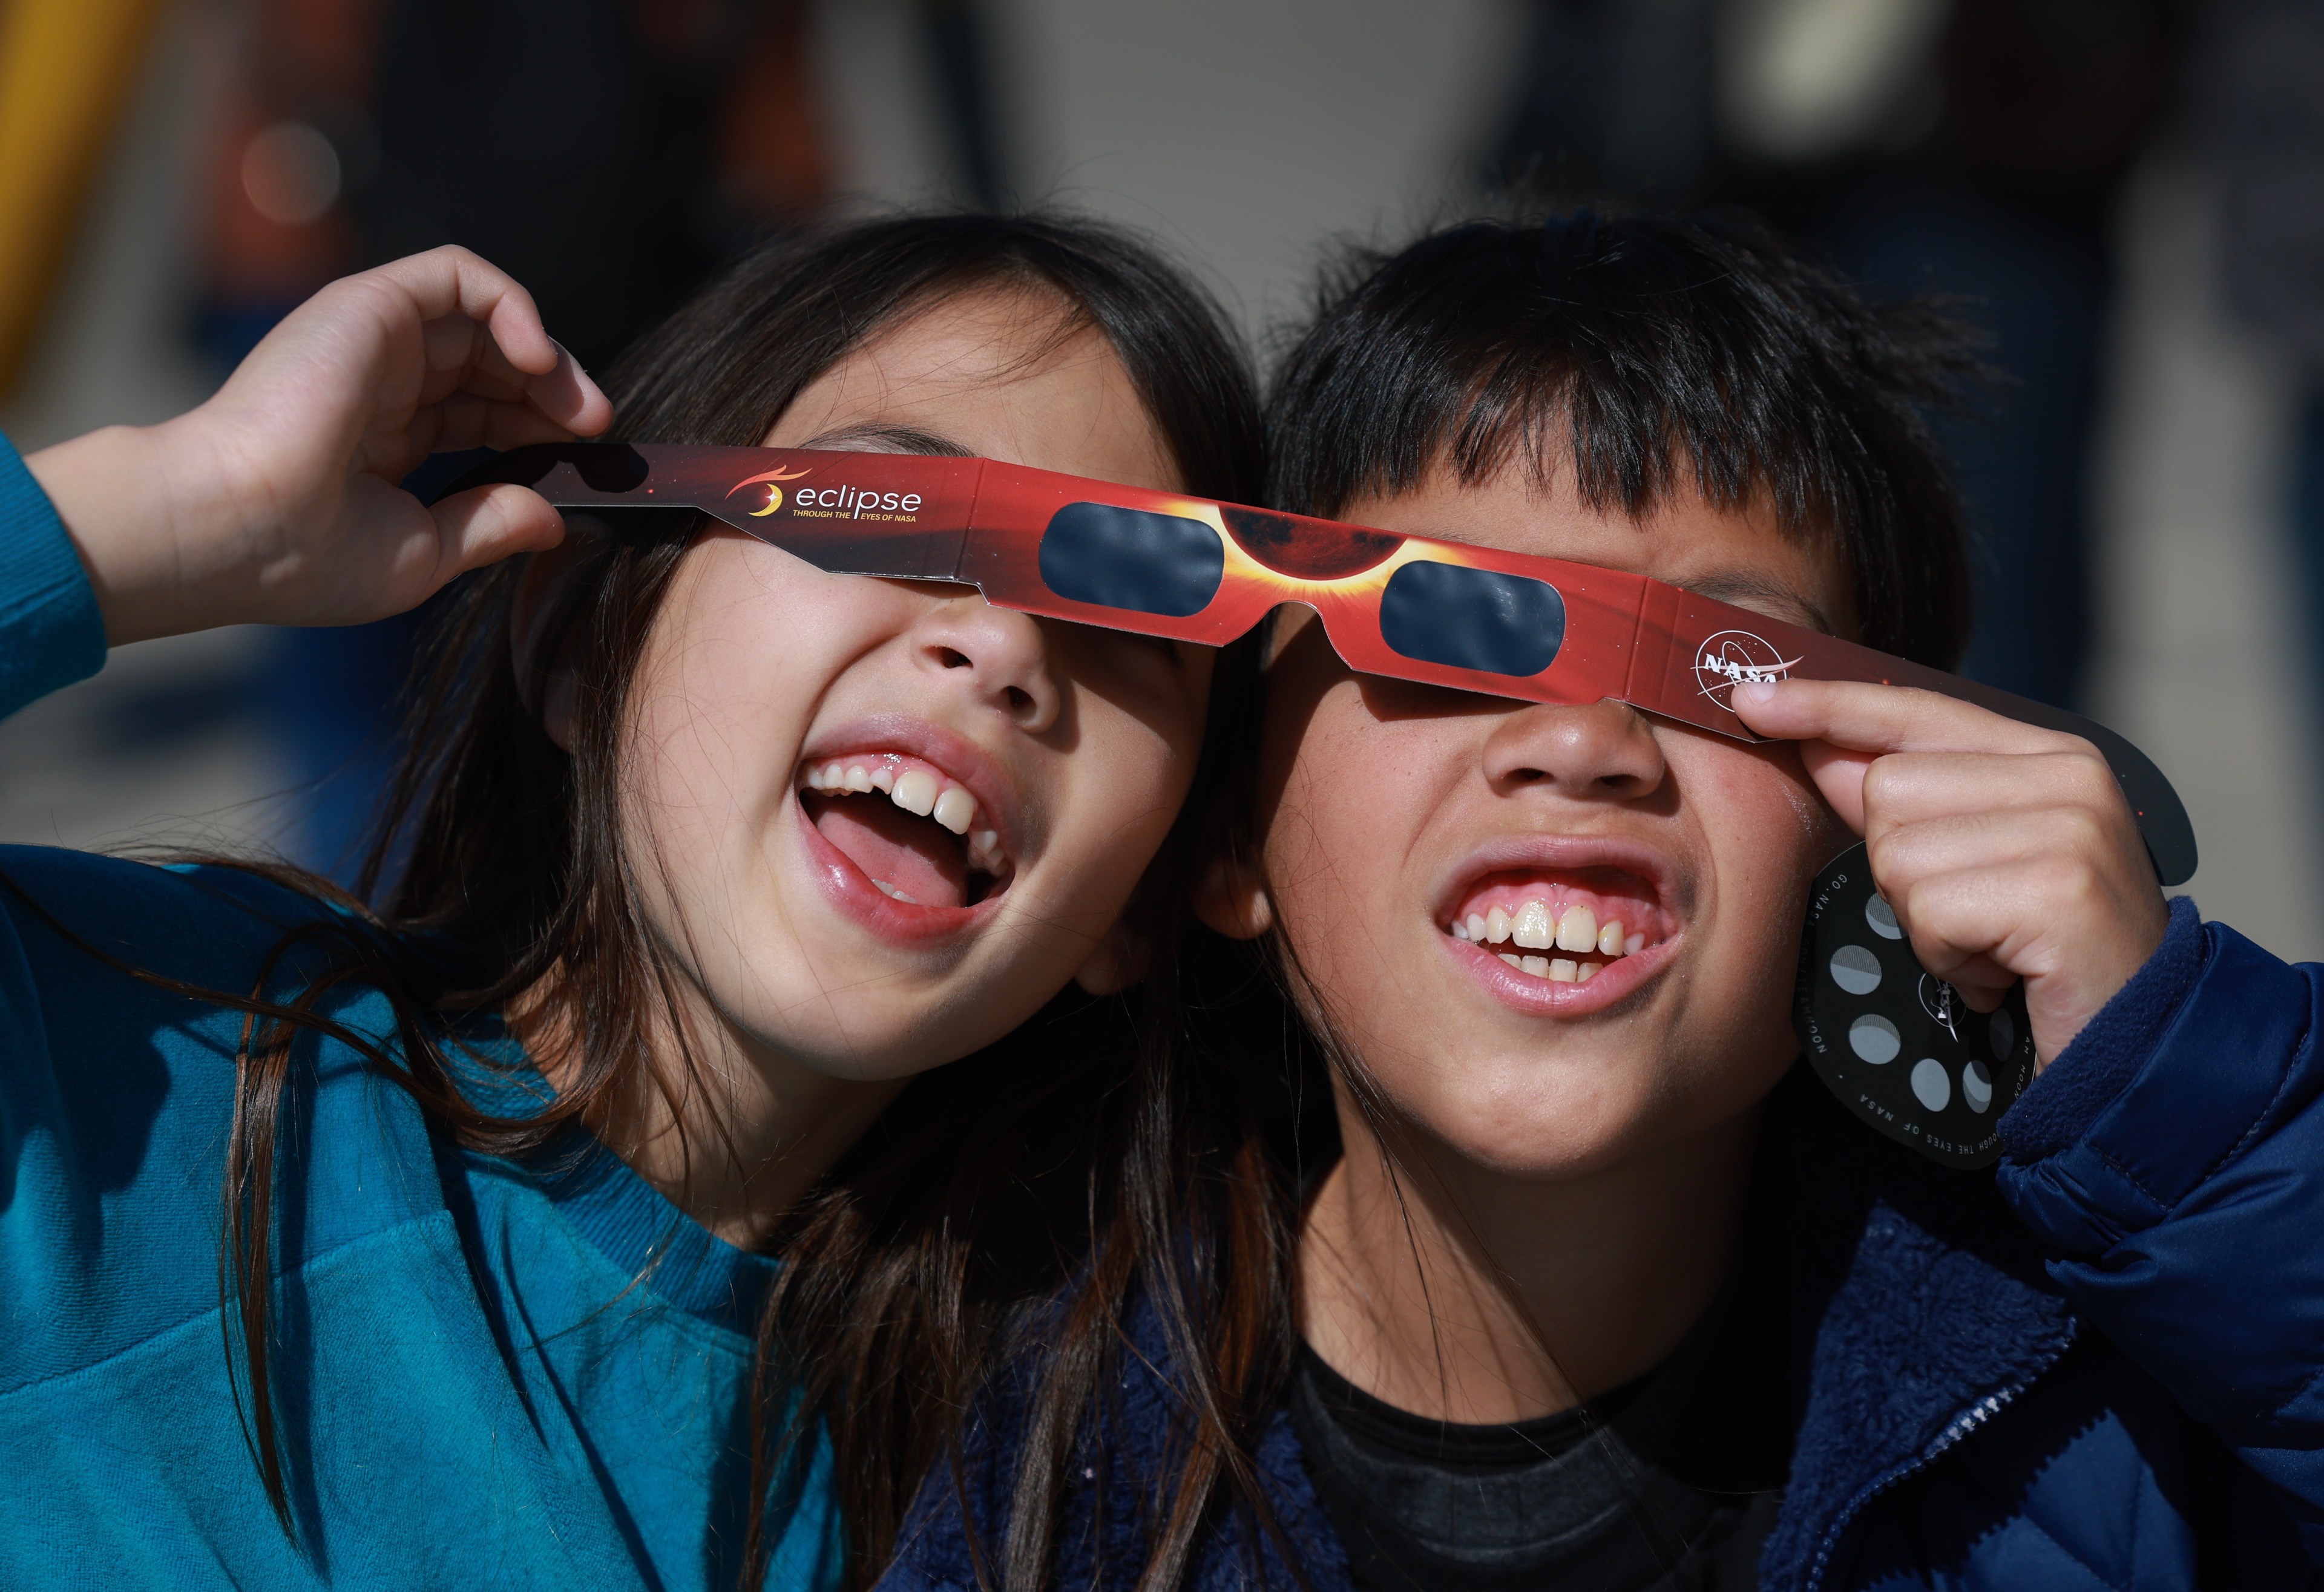 Two kids are smiling while sharing eclipse glasses.